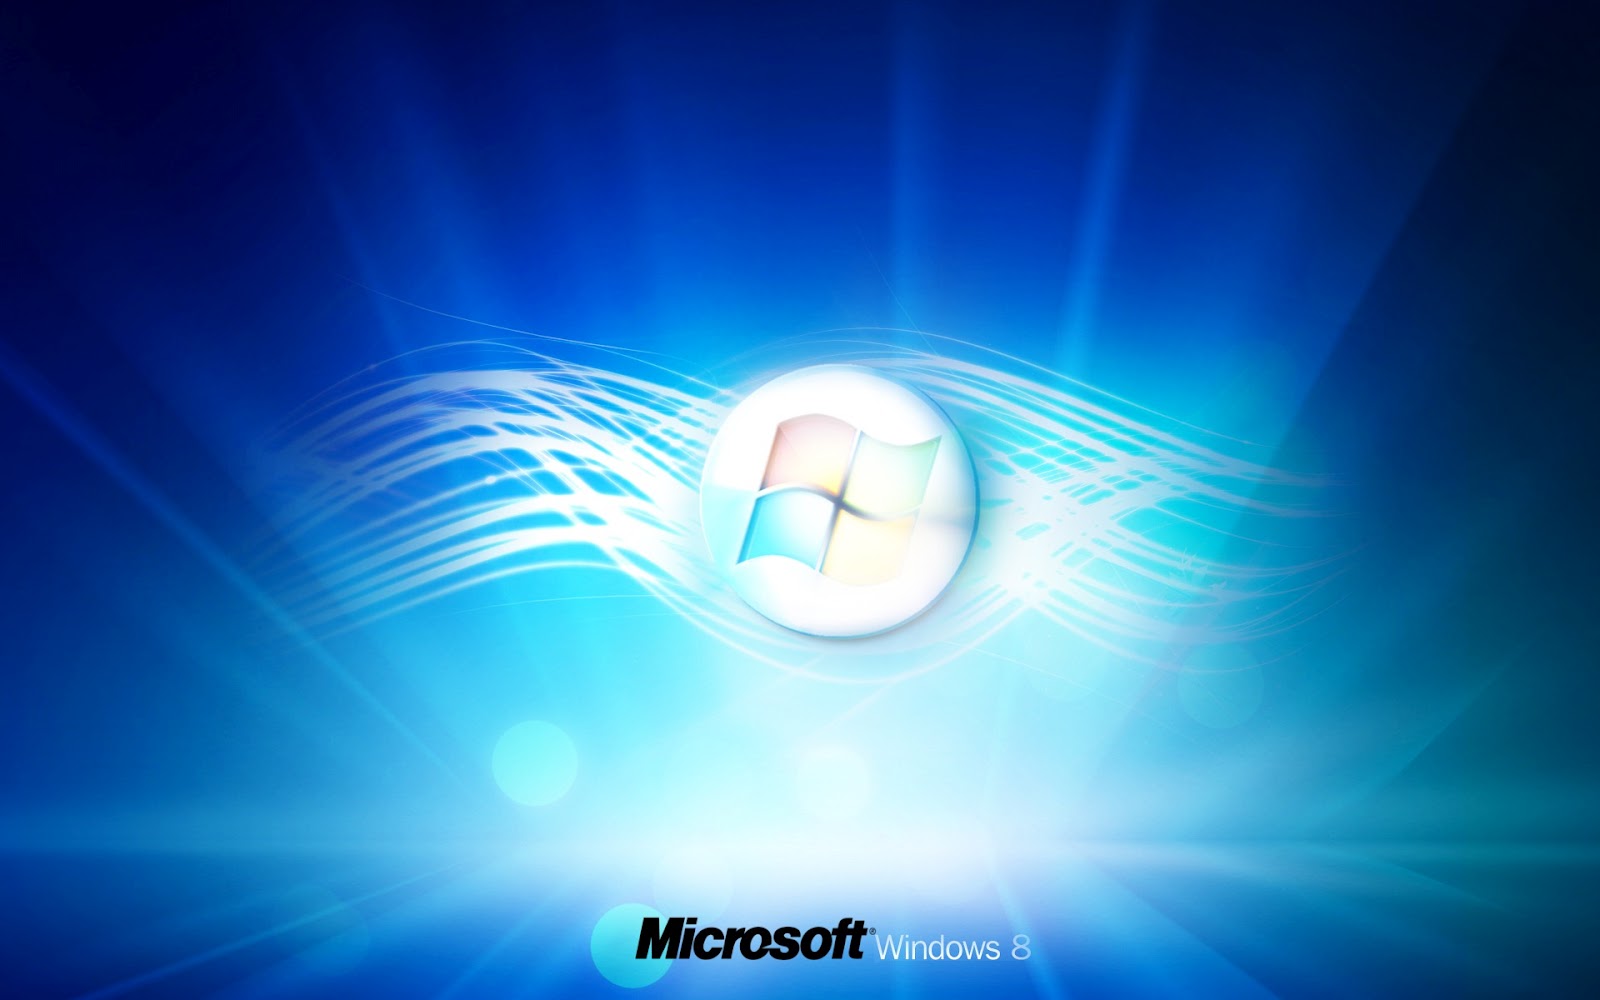  wallpapers desktop wallpapers and more windows 8 wallpapers 1600x1000